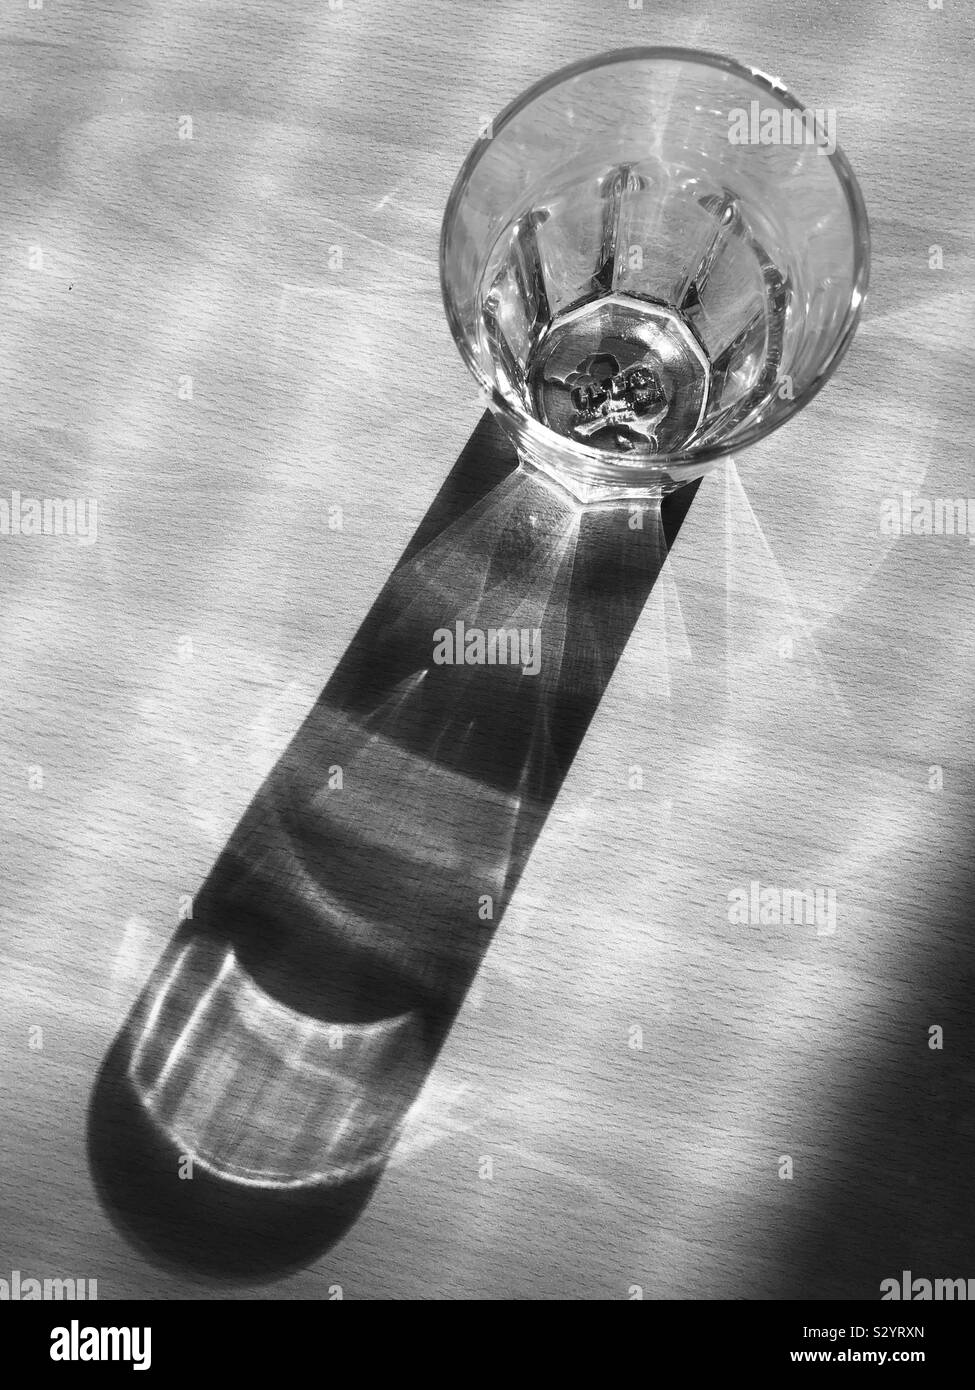 A glass of water on a table with shadows. Stock Photo